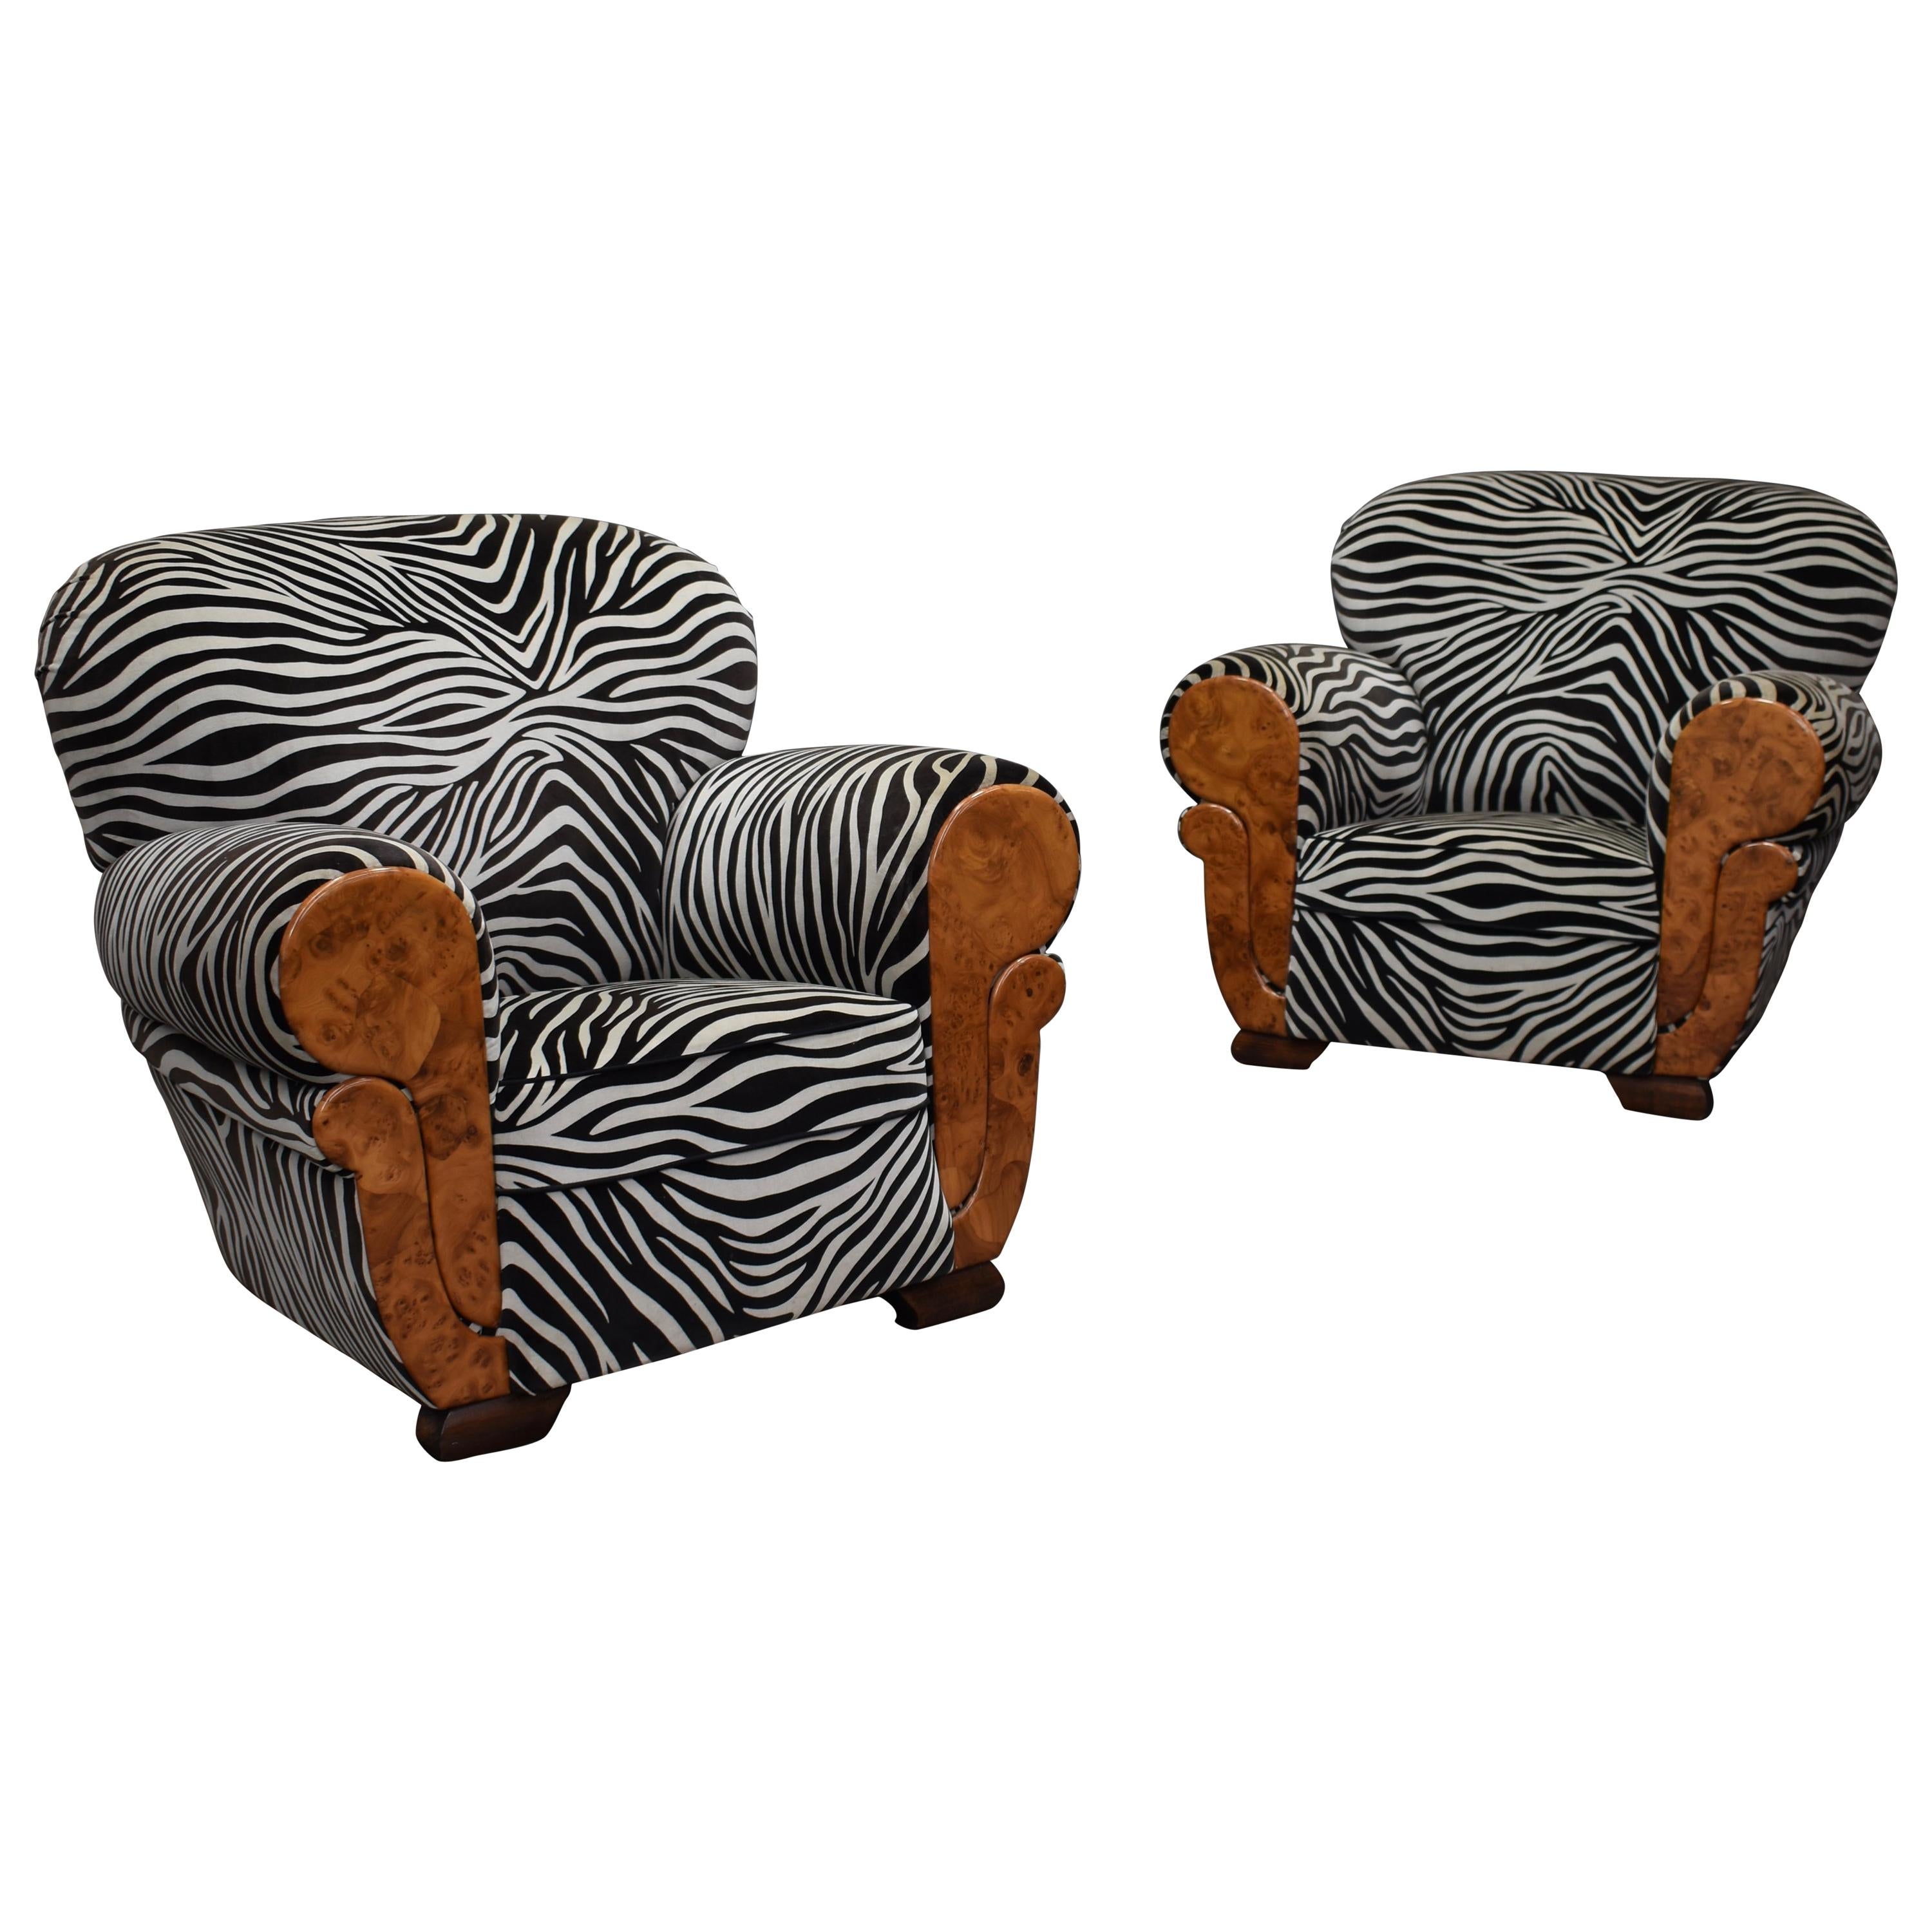 French Art Deco Lounge Club Chairs in Burl Wood and Zebra Velvet, circa 1930